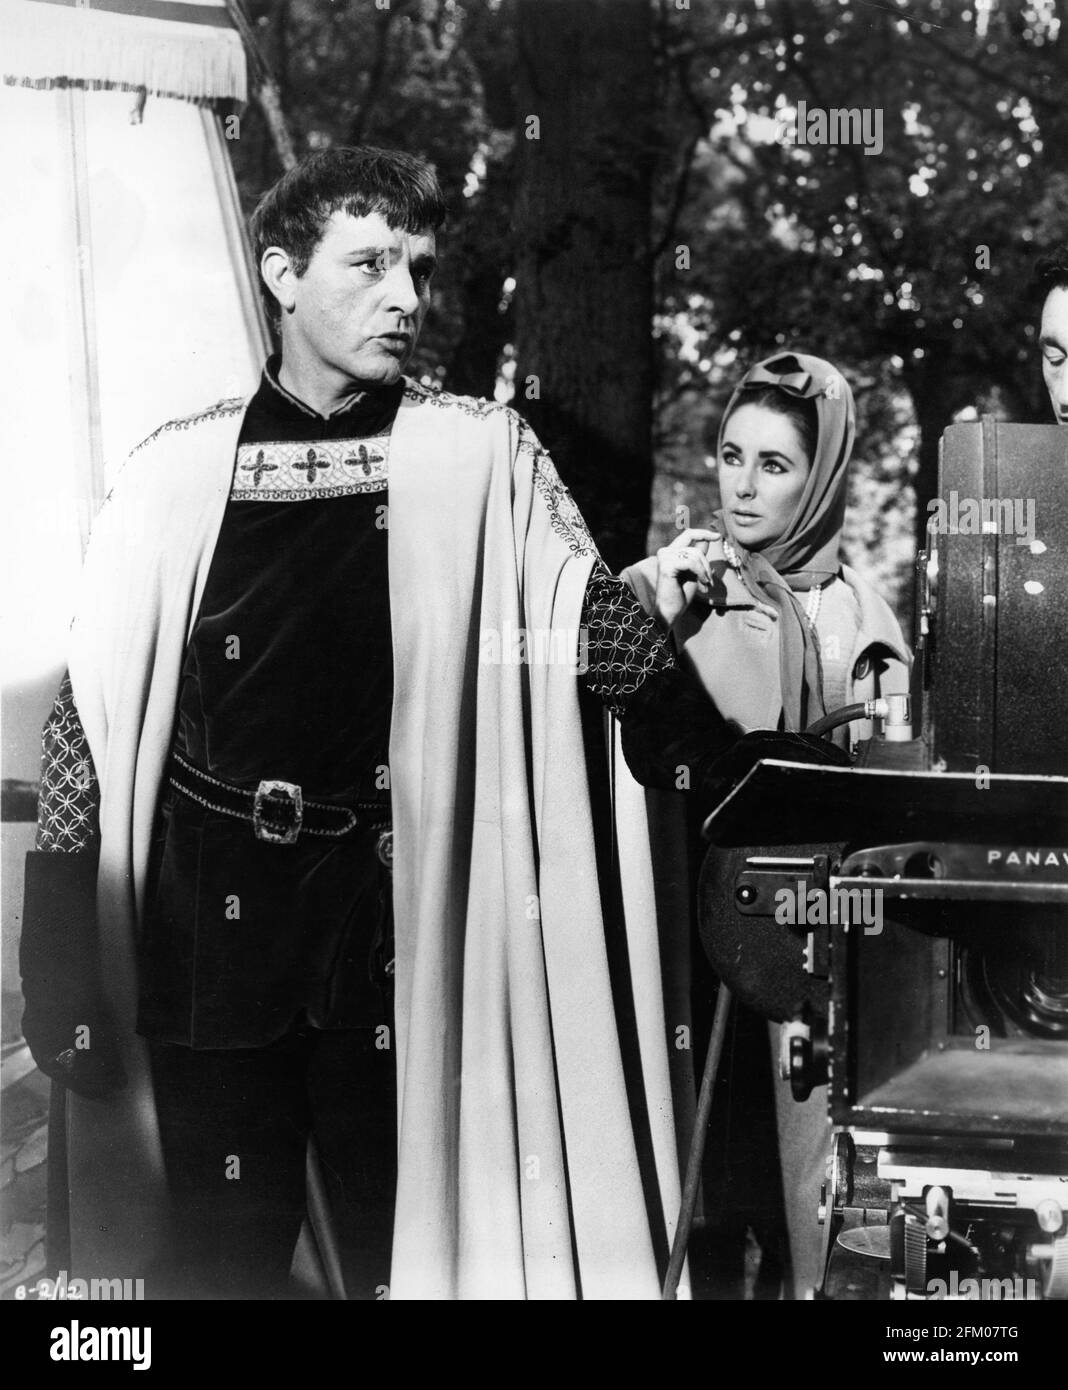 RICHARD BURTON with Set Visitor / Wife ELIZABETH TAYLOR on set candid during filming of BECKET 1964 director PETER GLENVILLE play Jean Anouilh and Lucienne Hill screenplay Edward Anhalt costume design Margaret Furse producer Hal B. Wallis  Wallis-Hazen A Paramount Film Service & Keep Films Co-Production / Paramount Pictures Stock Photo